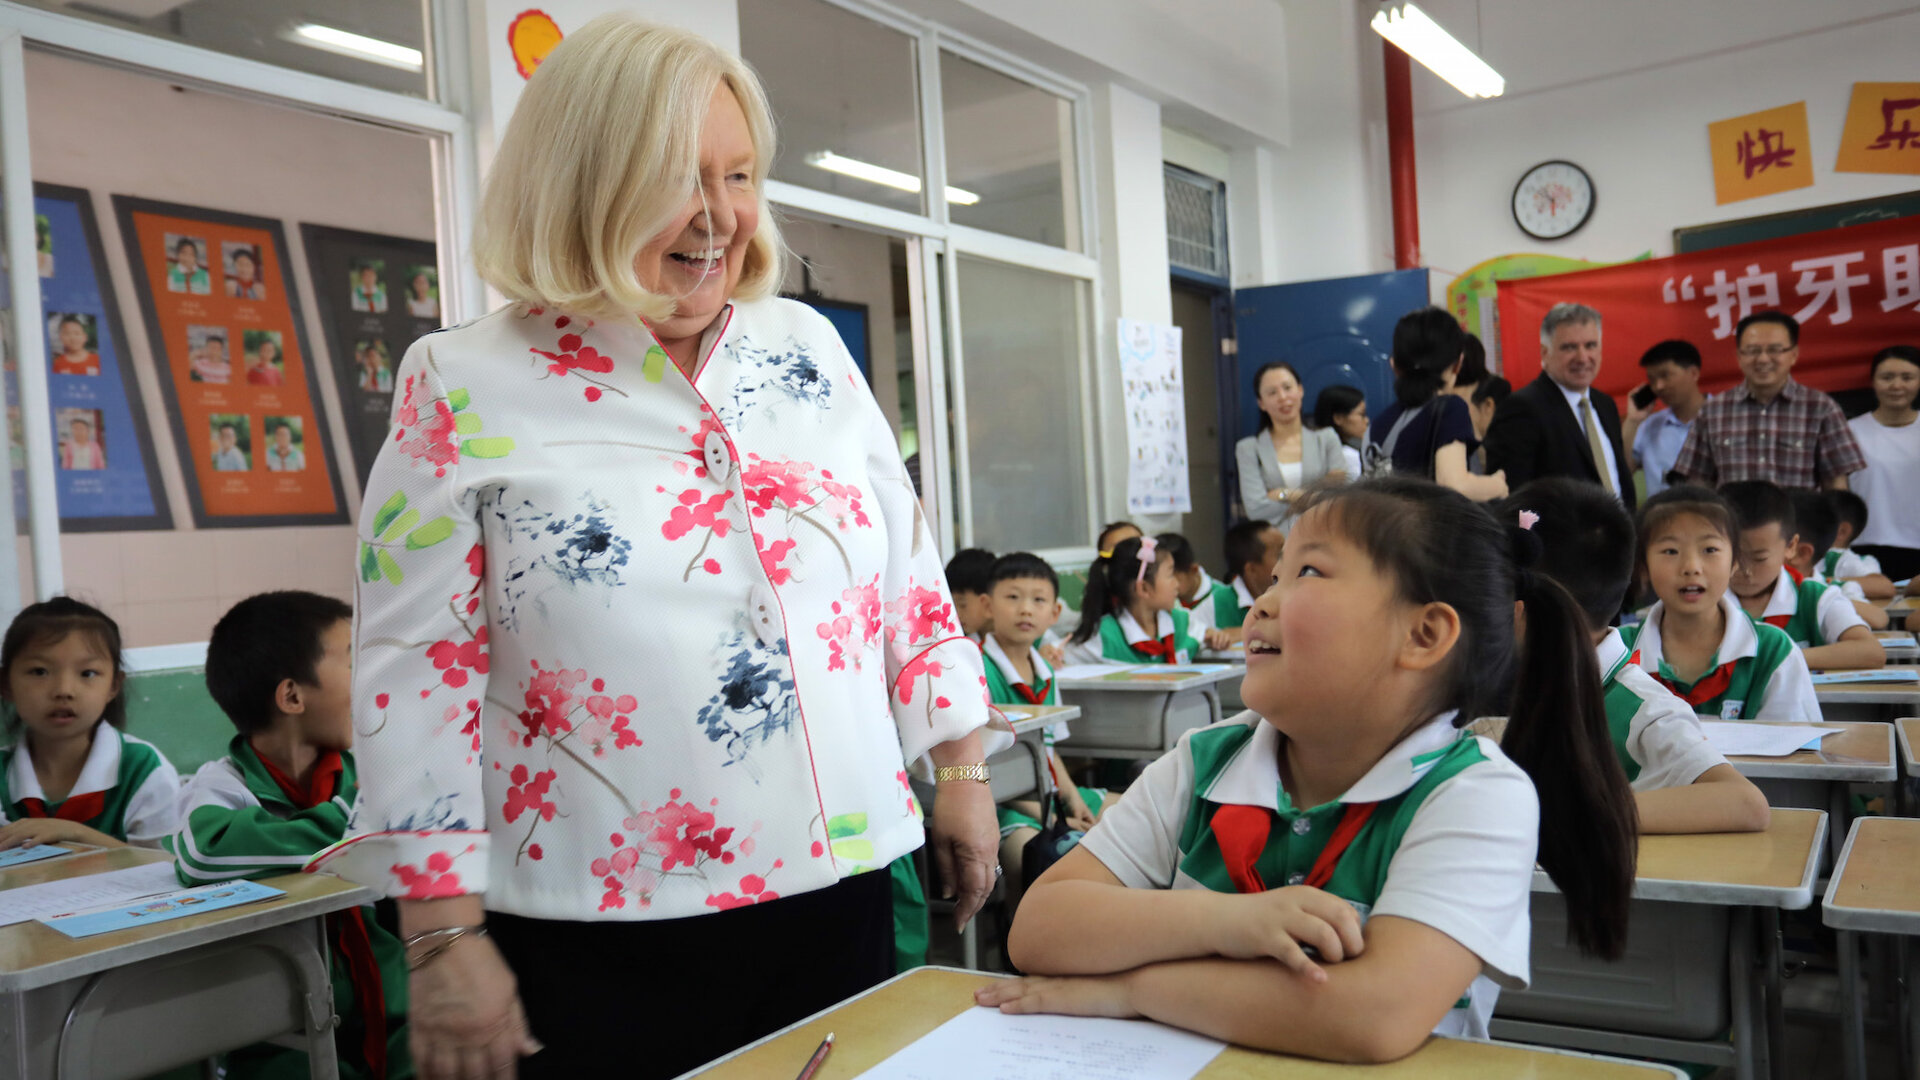 In China, Smile Around the World reports successful oral health education workshops